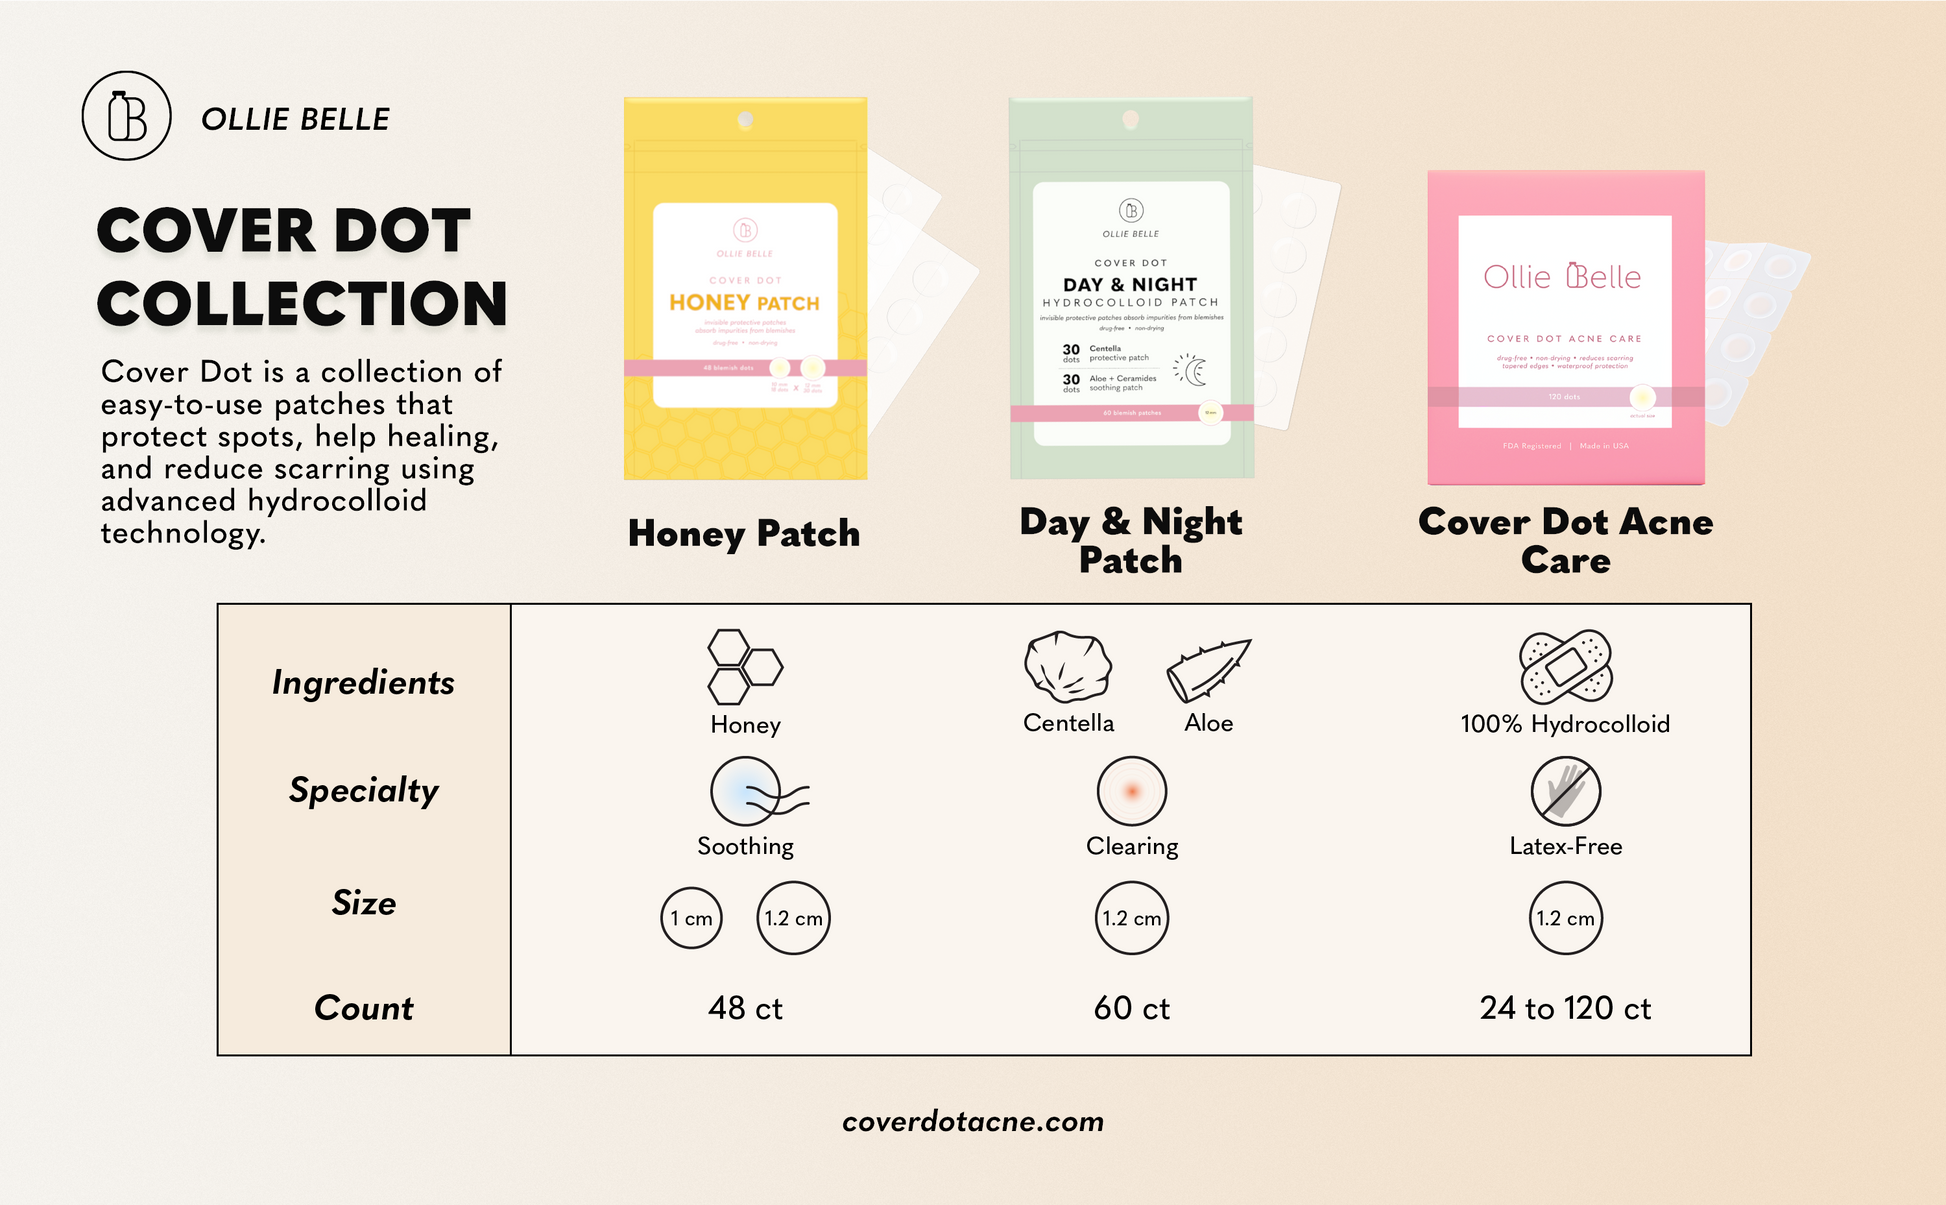 Comparison of hydrocolloid acne patches from ollie belle